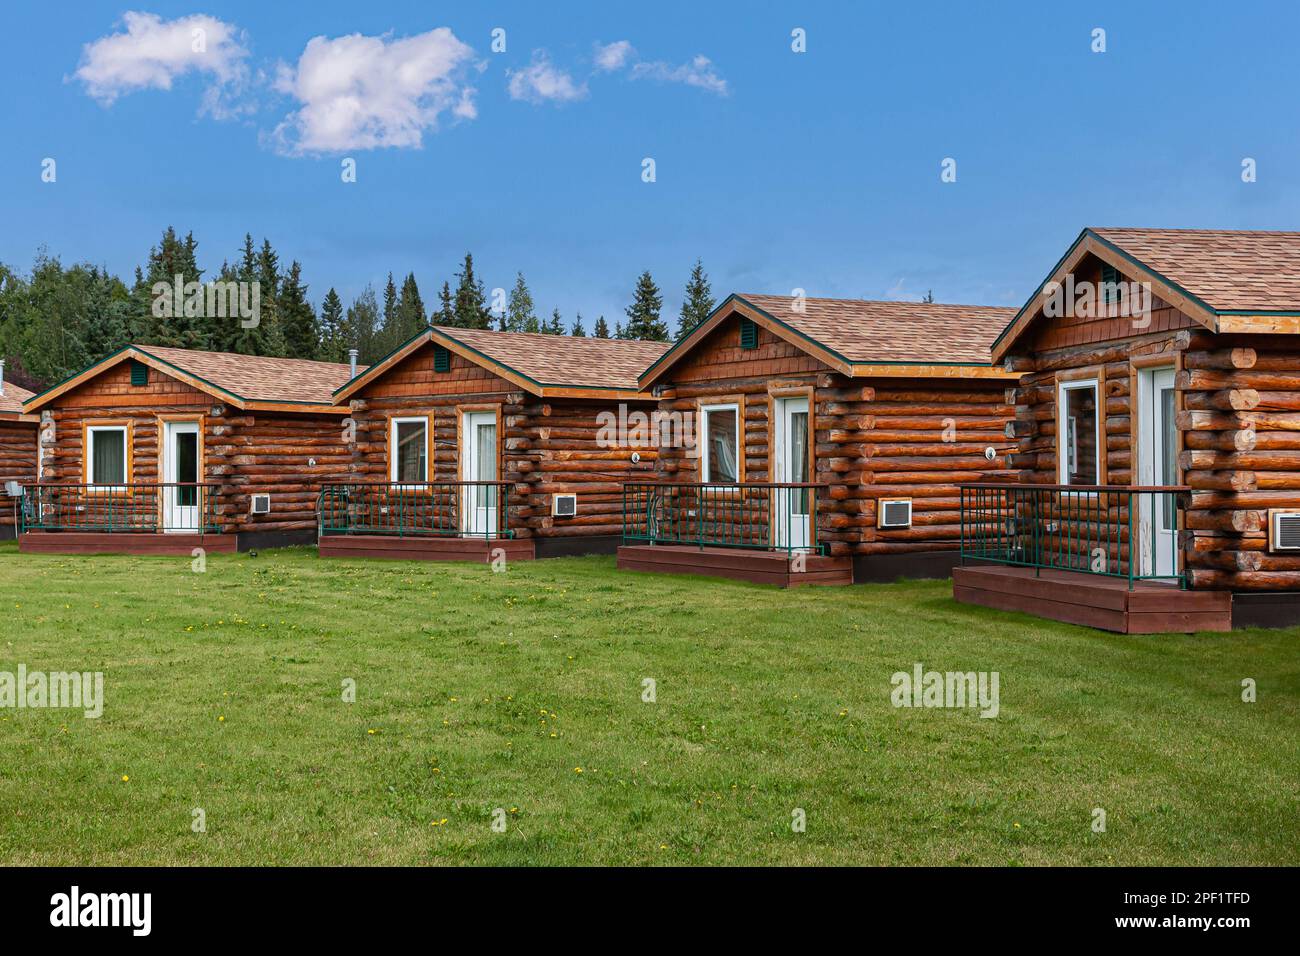 Fairbanks, Alaska, USA - July 27, 2011: Chena River and Pikes Waterfront Lodge offers brown wooden small dwellings behind green lawn under blue sky Stock Photo